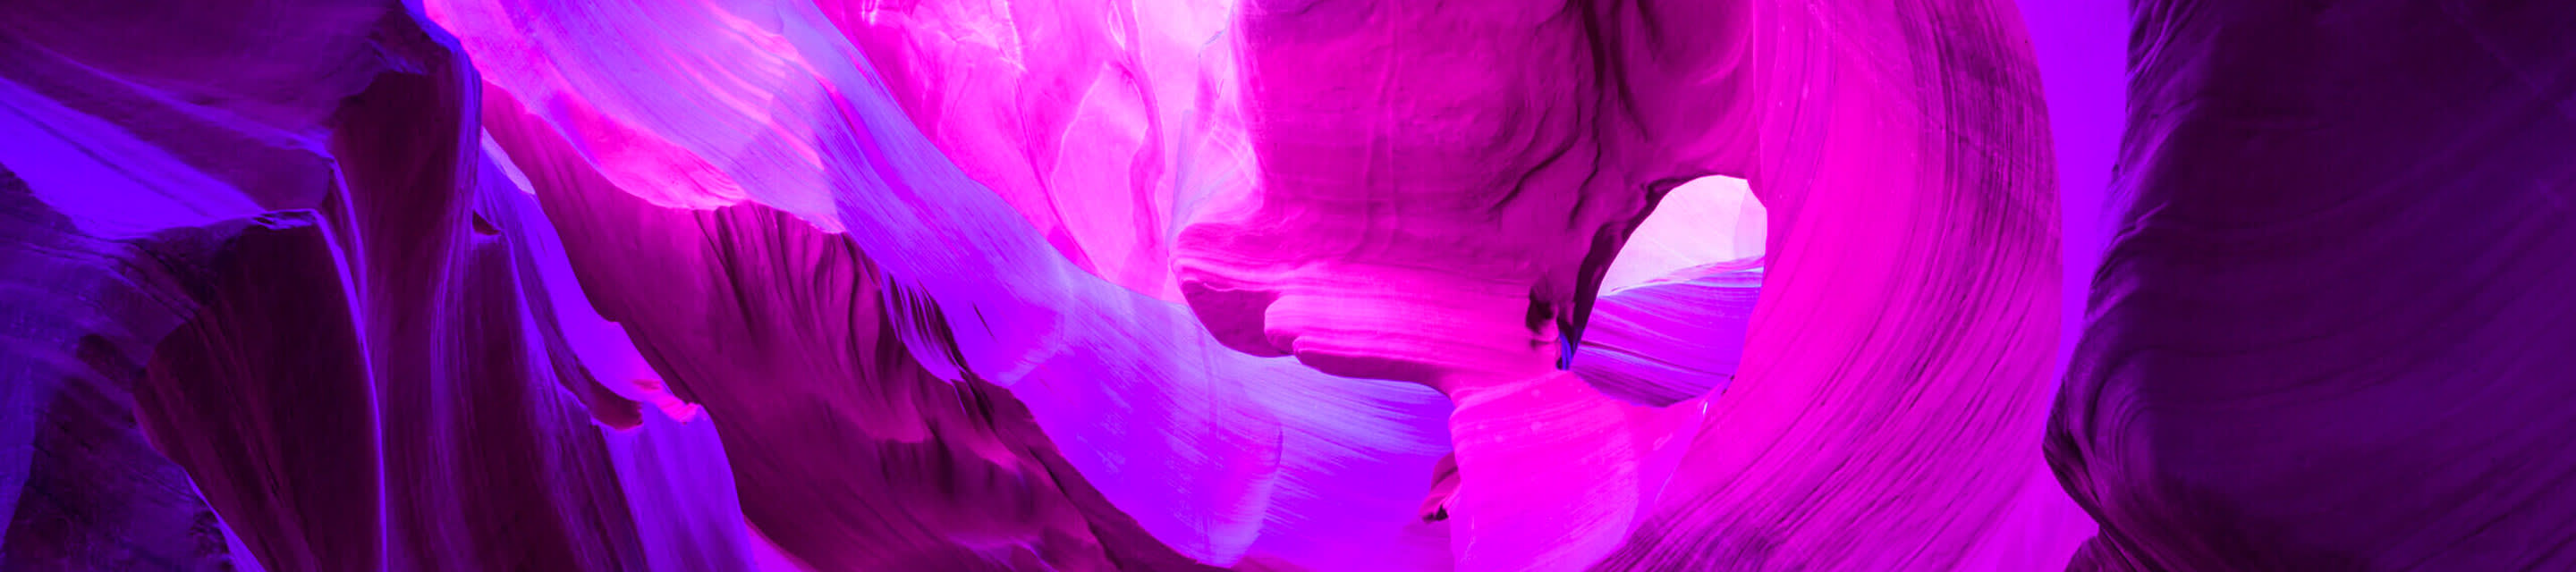 canyons in deep purples